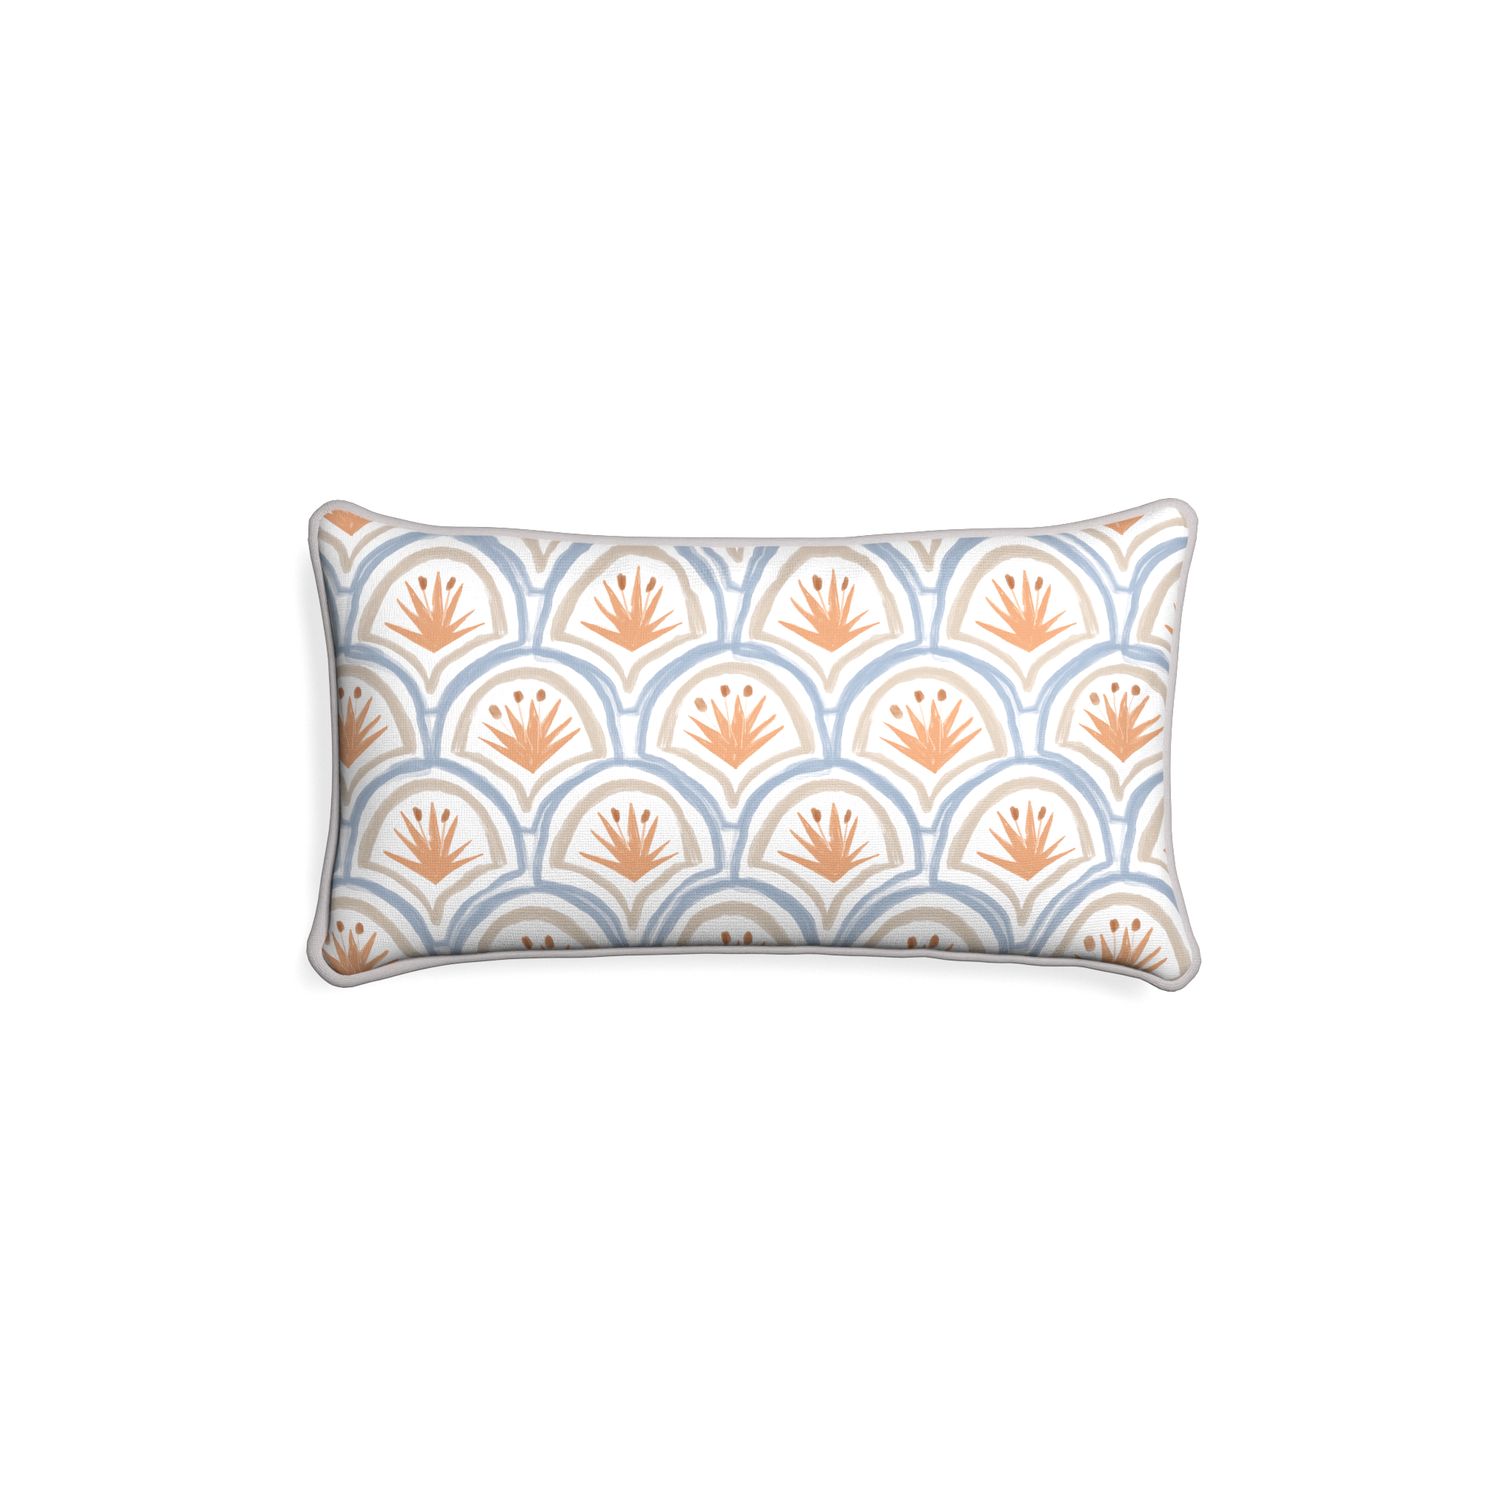 Petite-lumbar thatcher apricot custom art deco palm patternpillow with pebble piping on white background